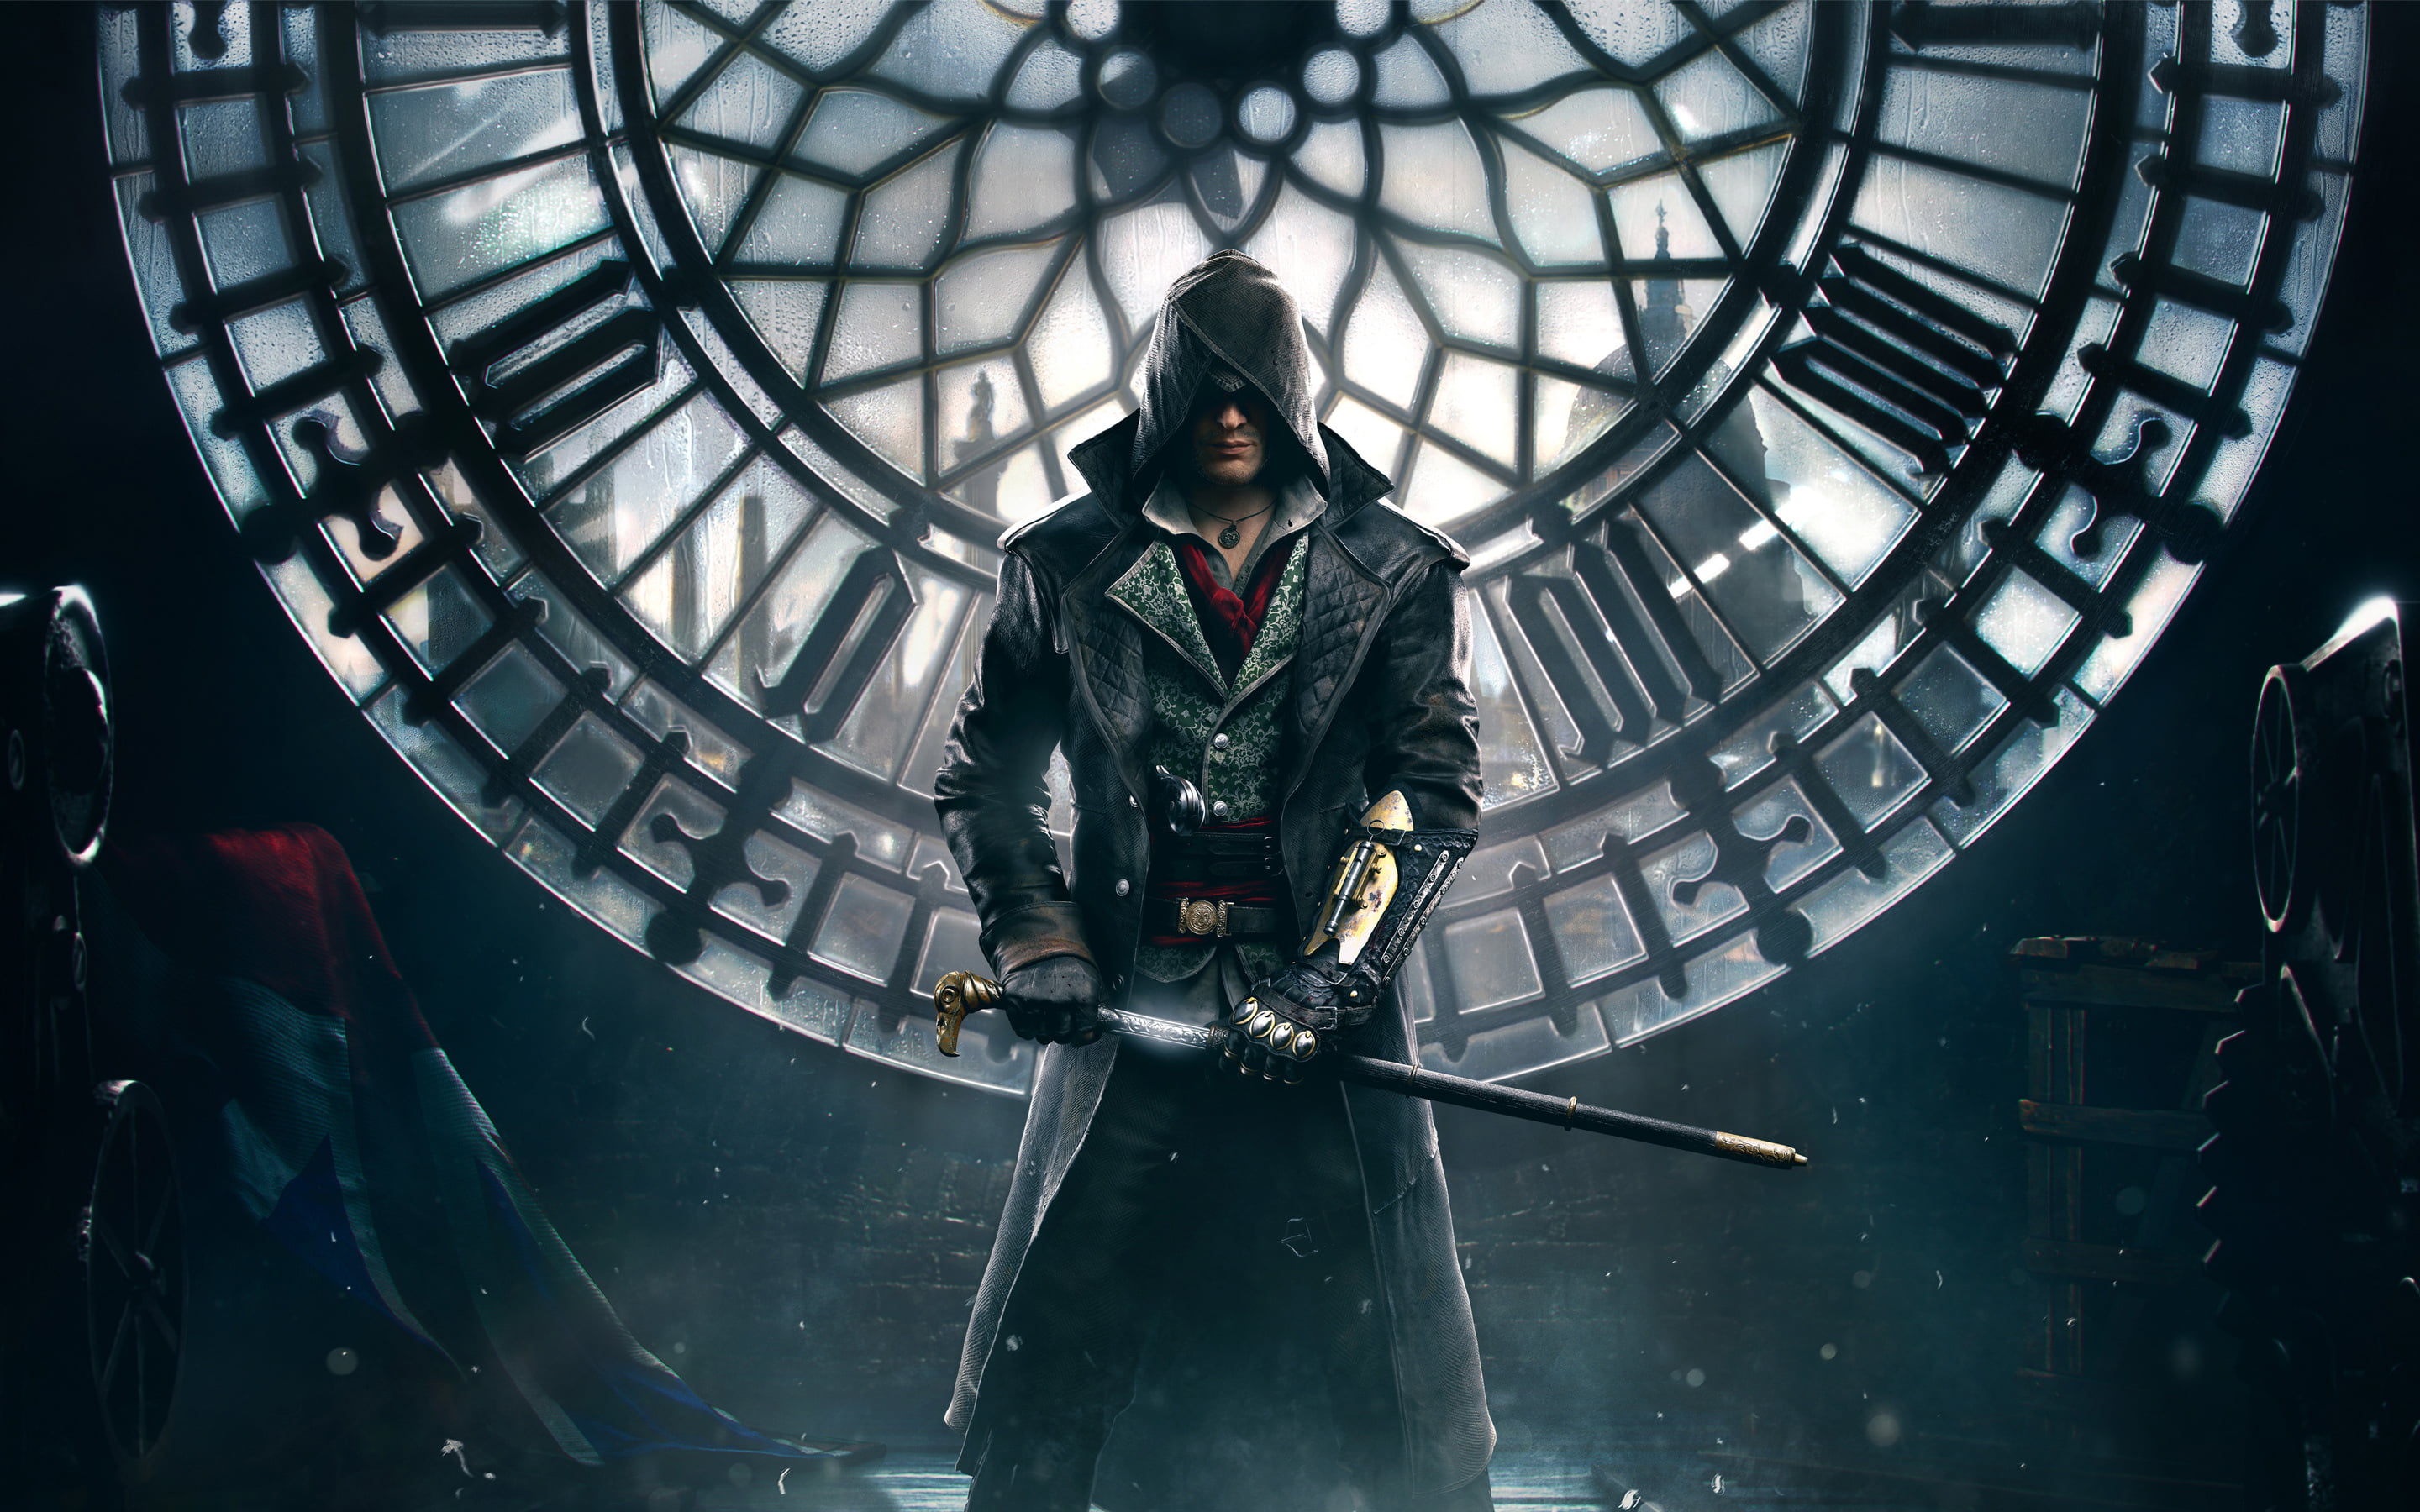 Assassin's Creed Jacob wallpaper, weapons, watch, London, tower